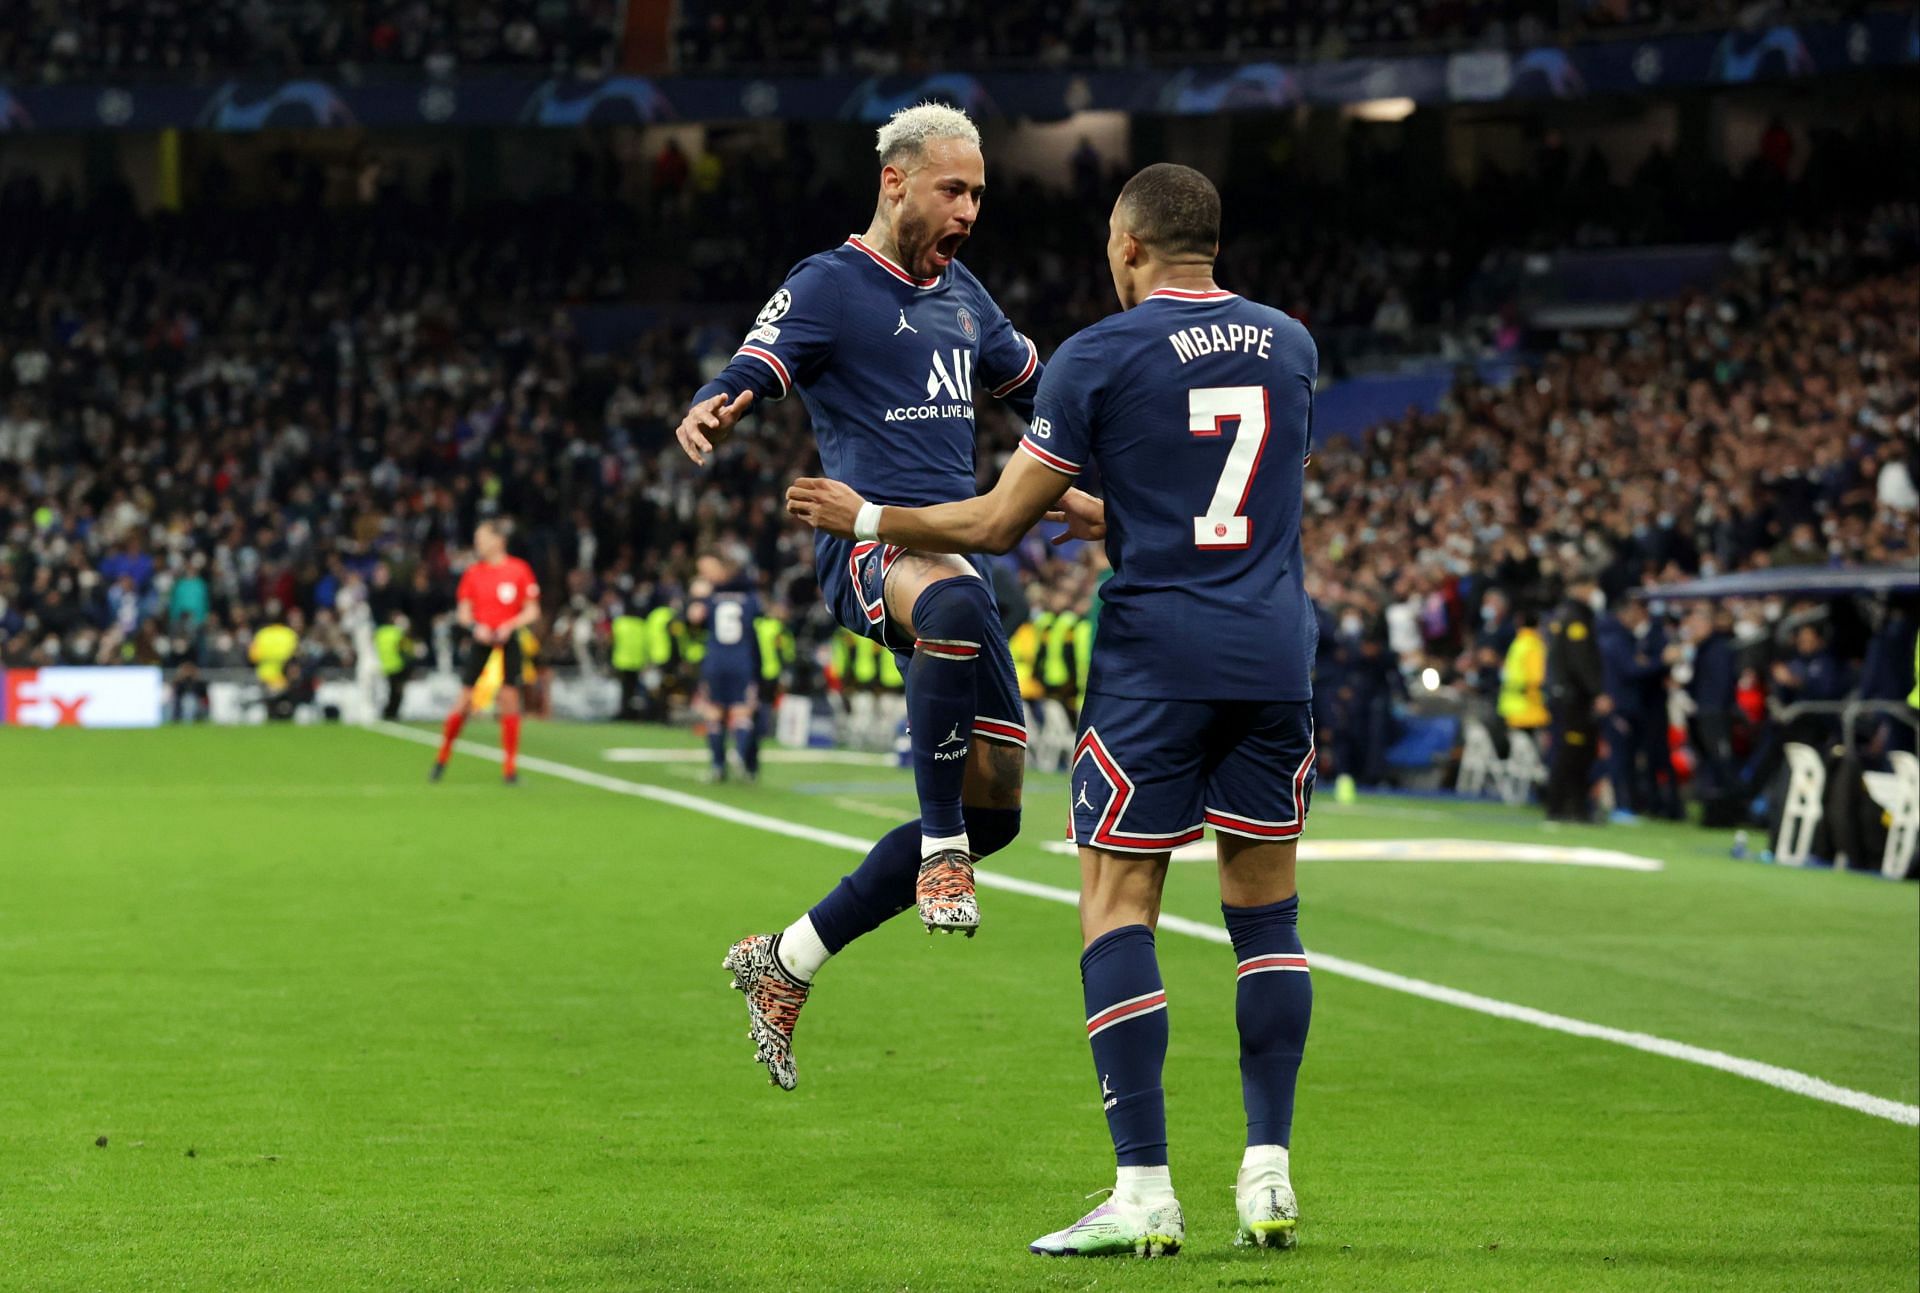 Kylian Mbappe (right) and Neymar have made news for their strained relationship.